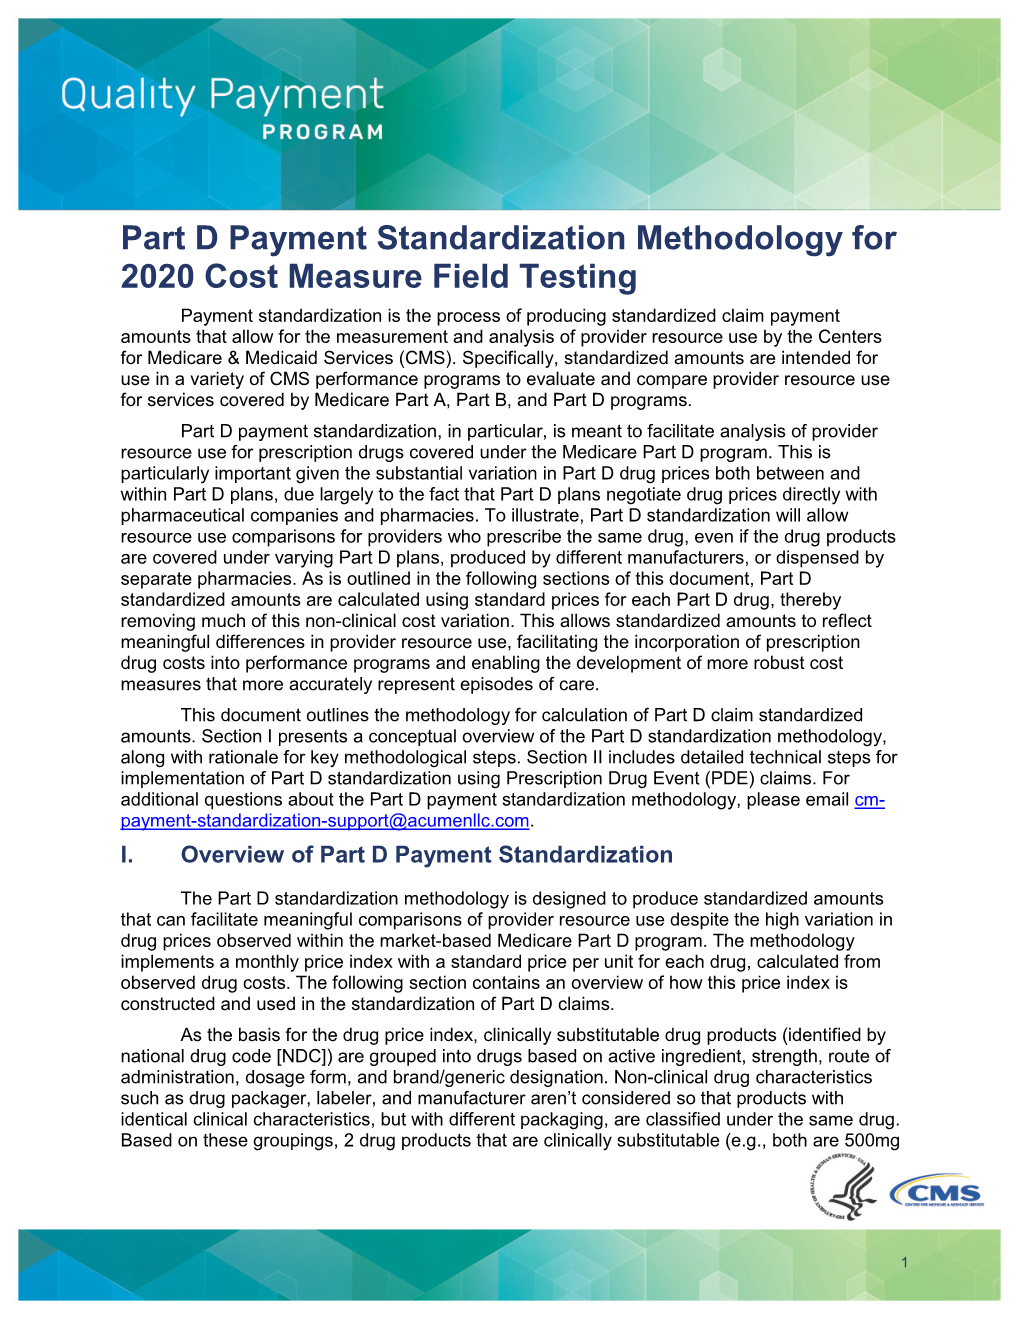 Part D Payment Standardization Methodology for 2020 Cost